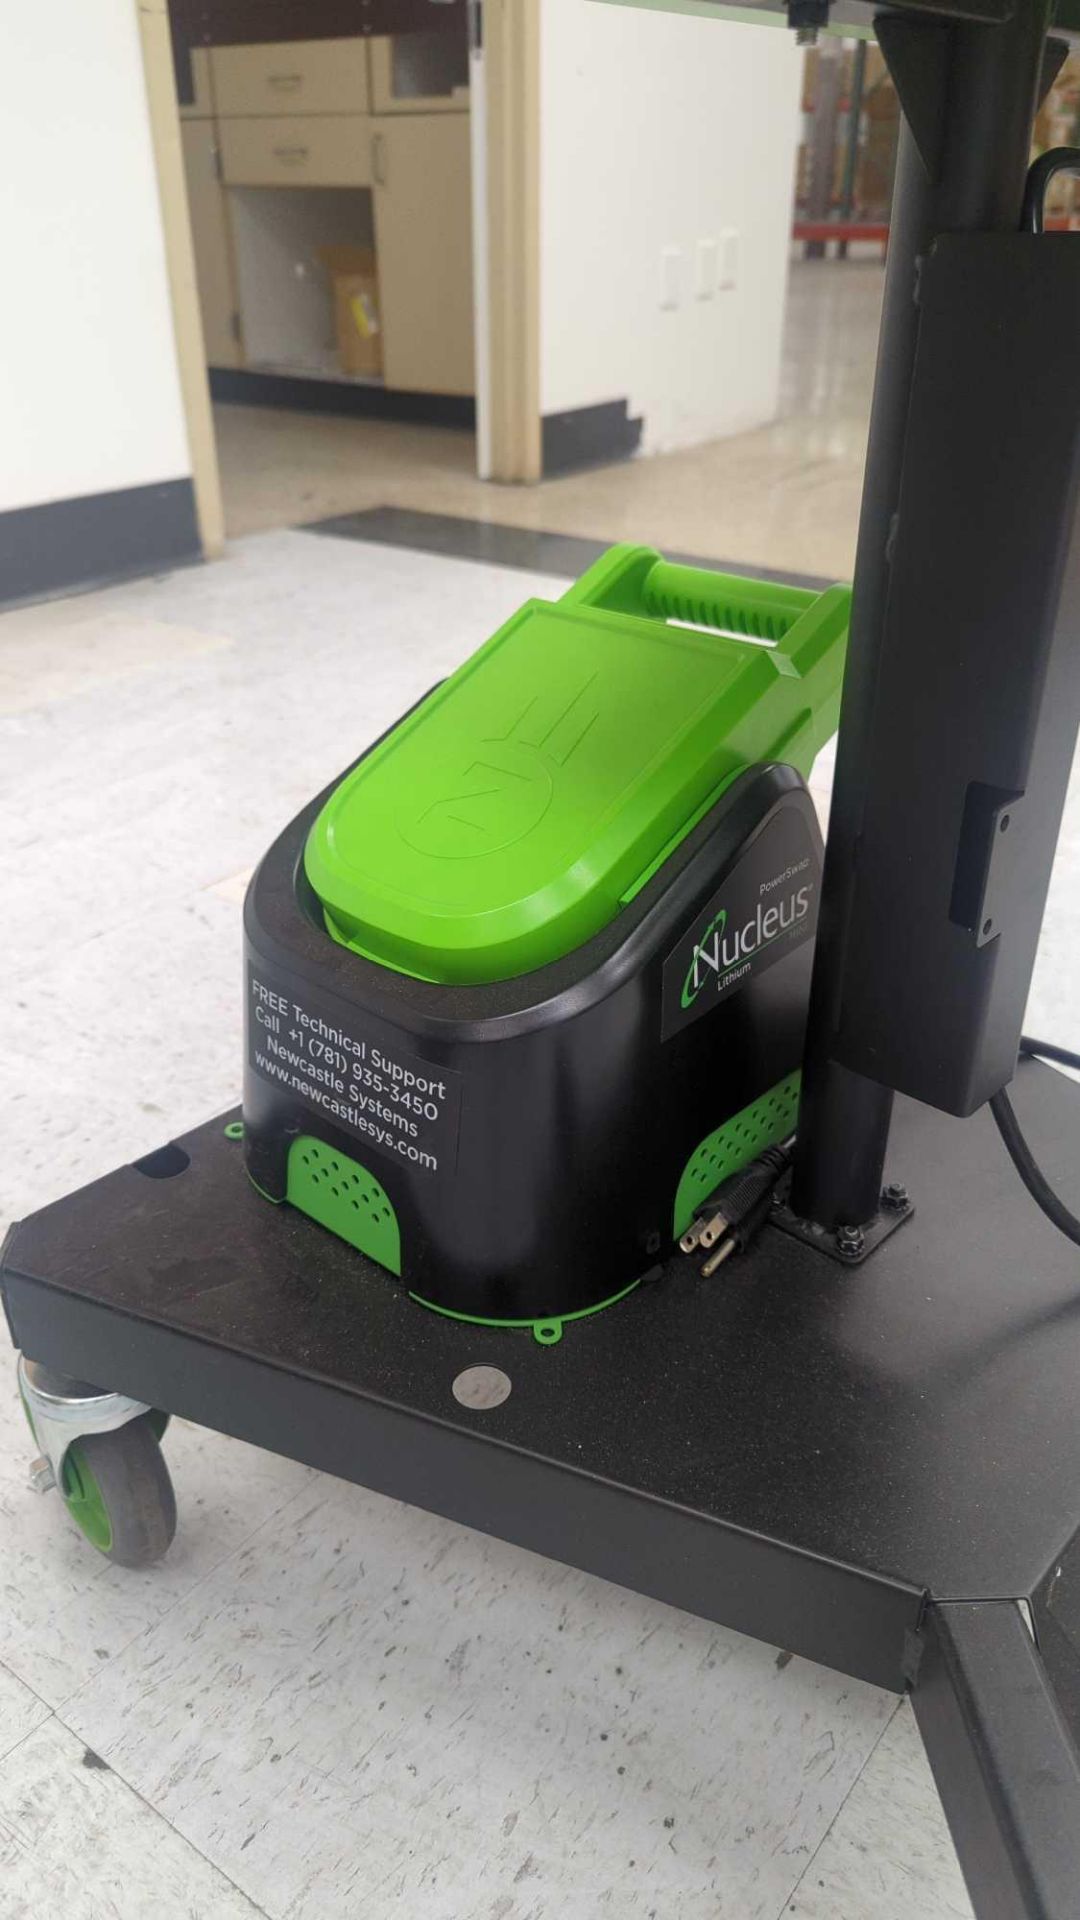 Newcastle Systems Nucleus Mini Power Dock station with cart and Zebra ZD420 printer - Image 2 of 5